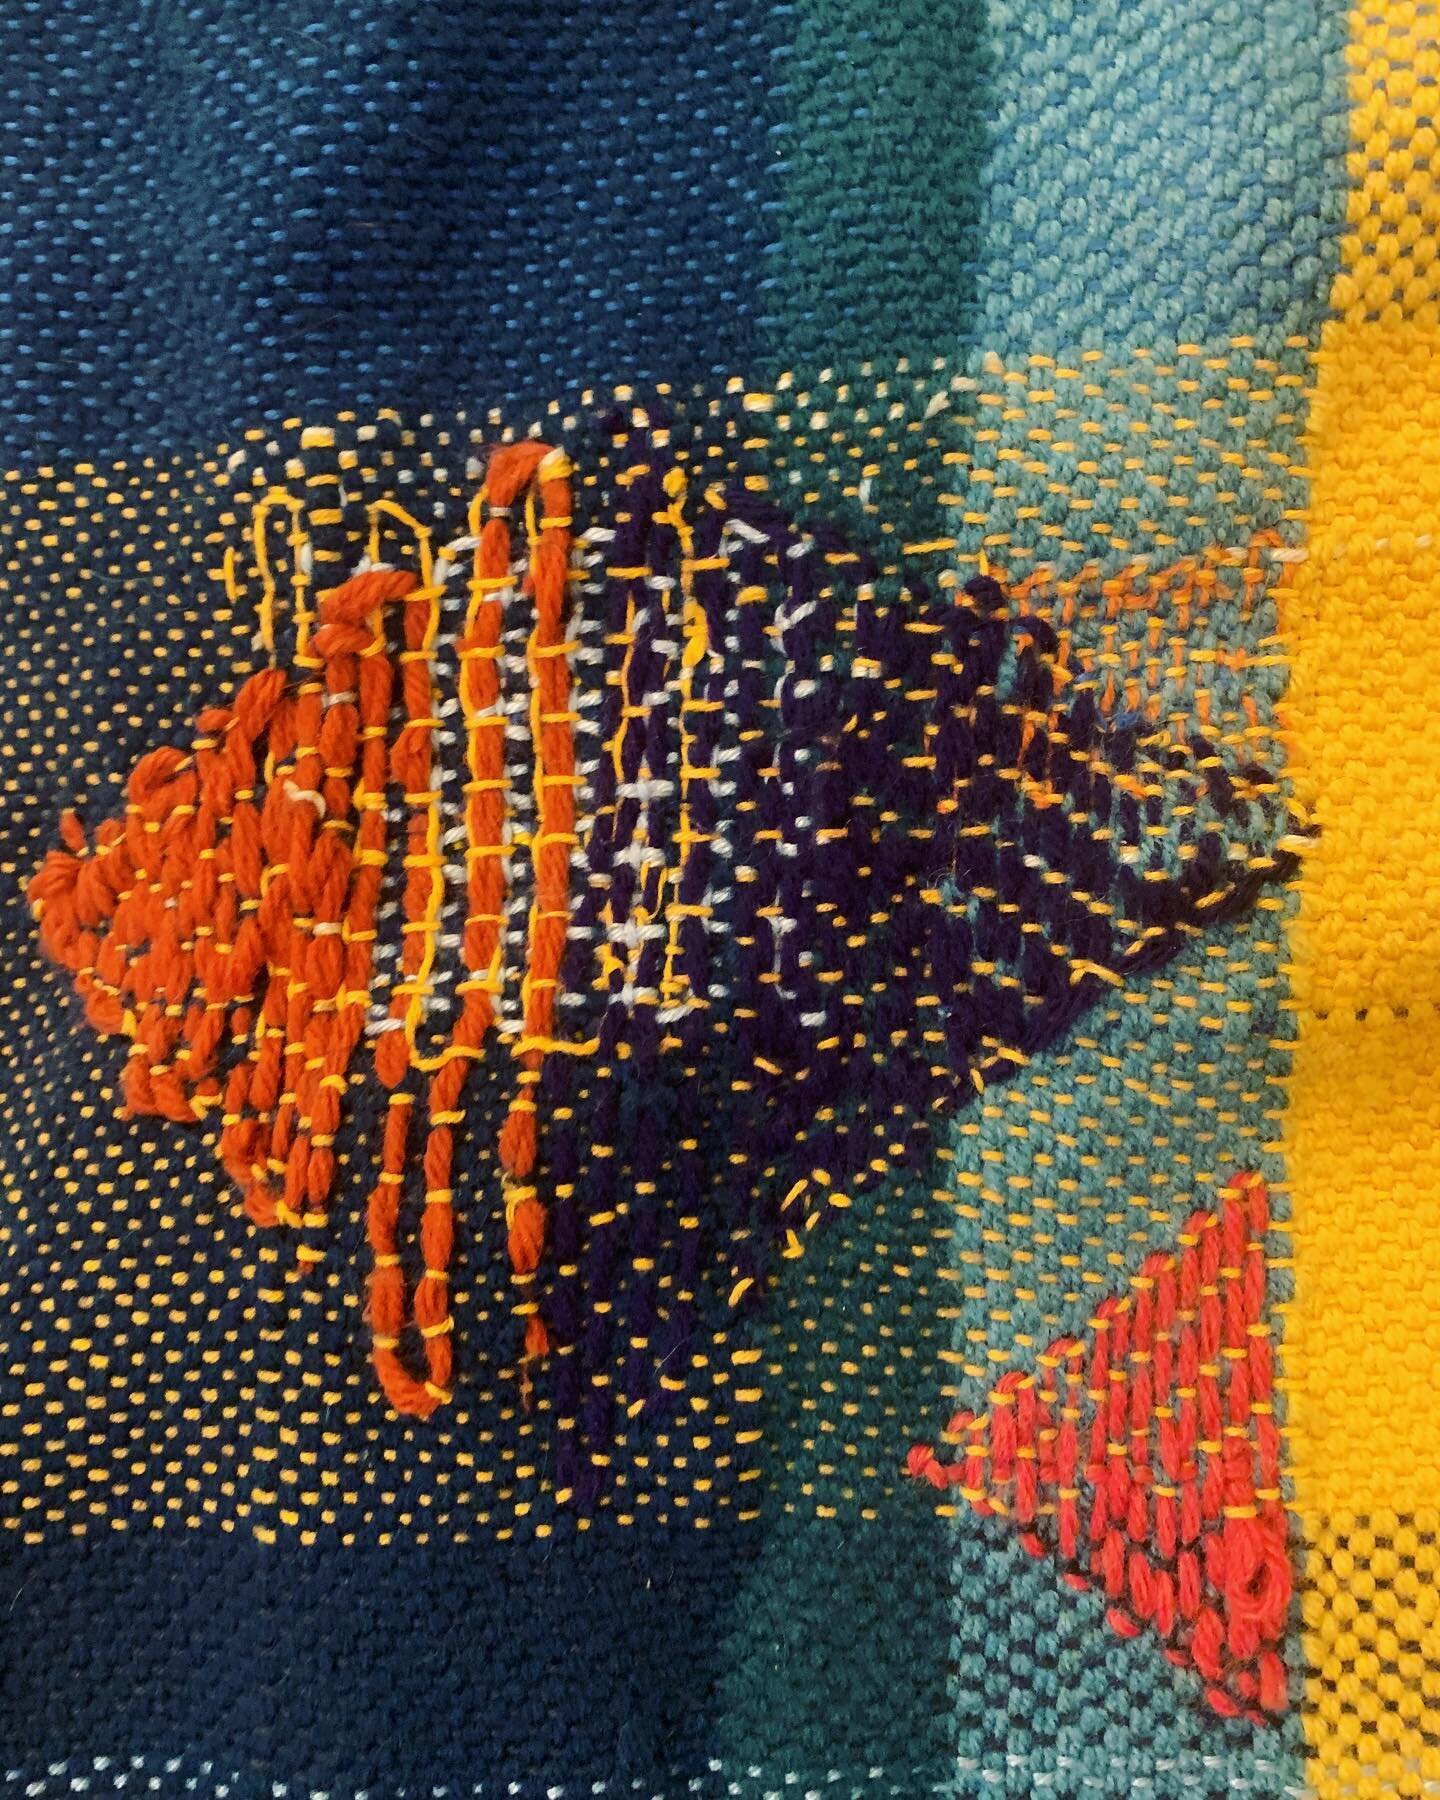 This is a very small section of a square weaving that I did recently and then kind of mend it over and over again. I really liked the effect.